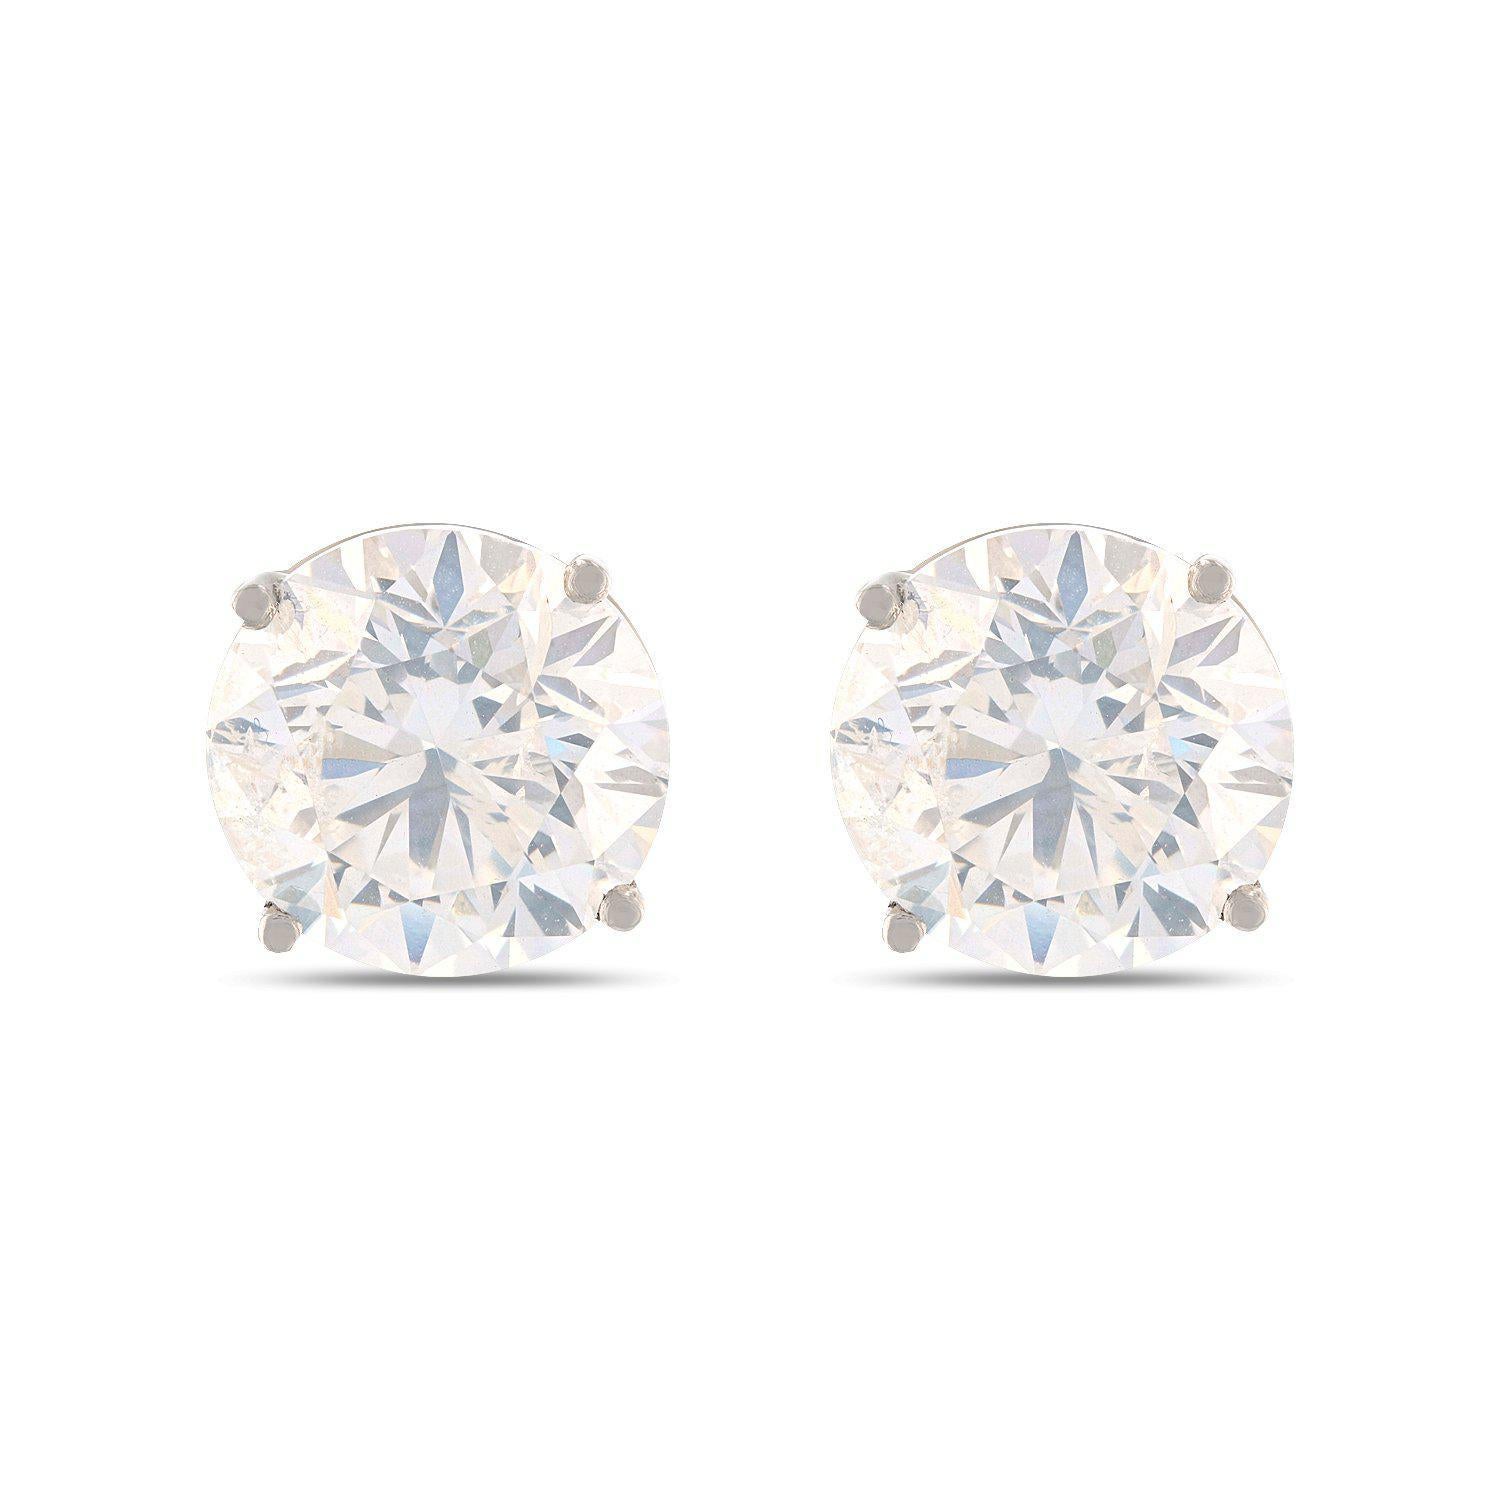 One pair electronically tested platinum ladies cast & assembled diamond solitaire earrings with screw backs. Identified with markings of 